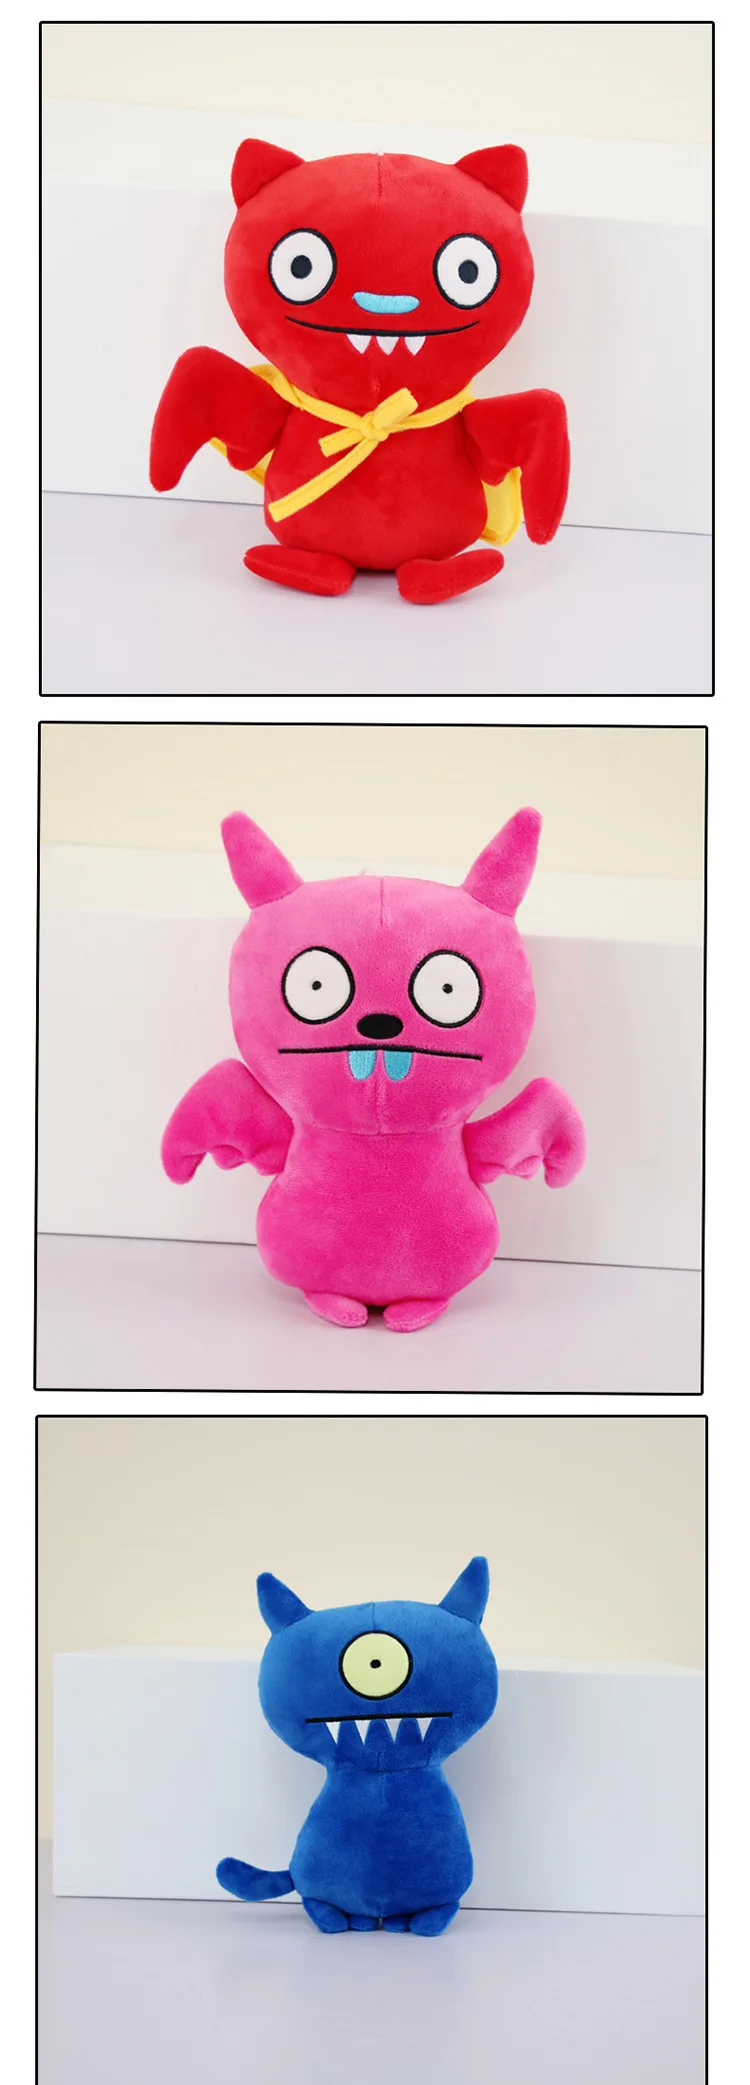 New Arrival 28cm Ugly doll Plush Toy Soft Stuffed Ugly Gifts for Children's Animation Doll Cartoon Dolls Festival Gifts